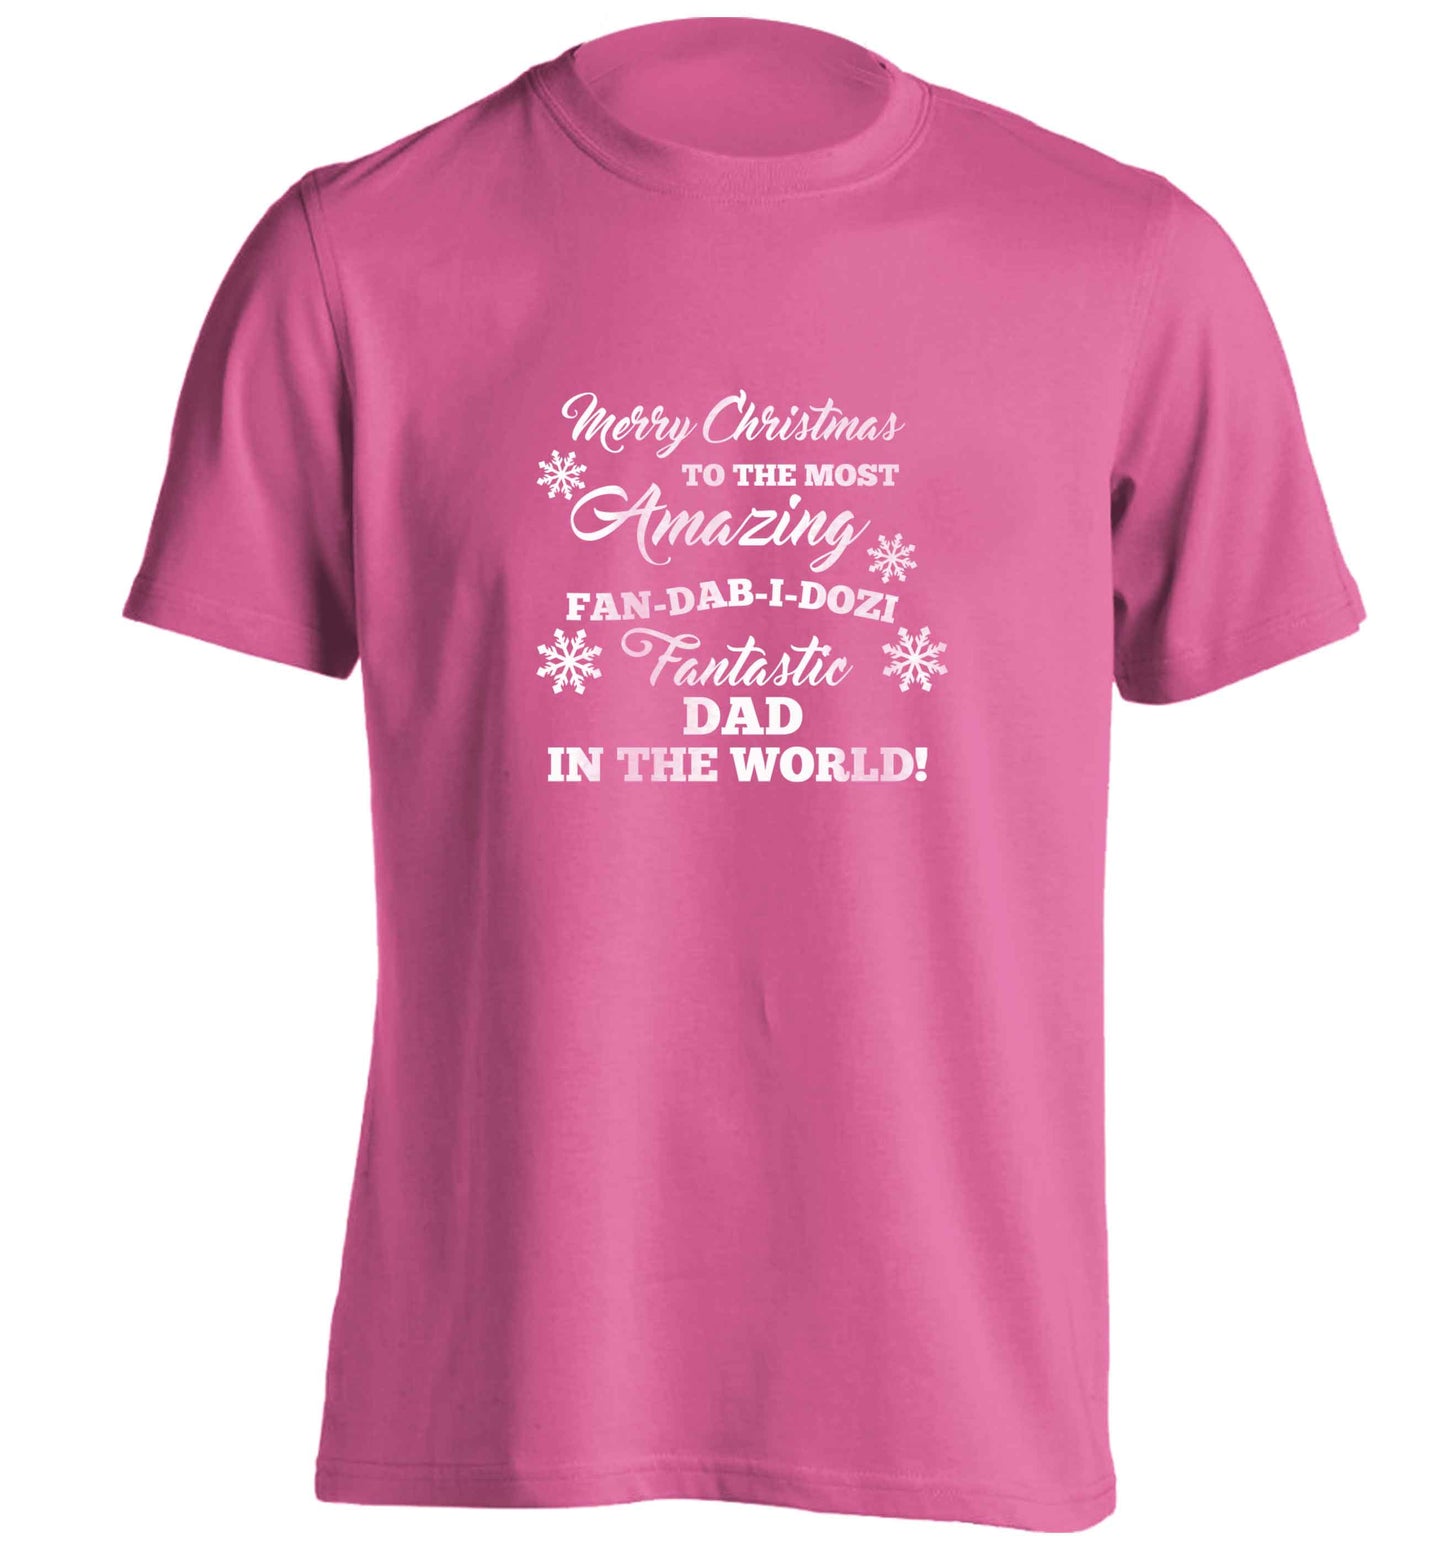 Merry Christmas to the most amazing fan-dab-i-dozi fantasic Dad in the world adults unisex pink Tshirt 2XL